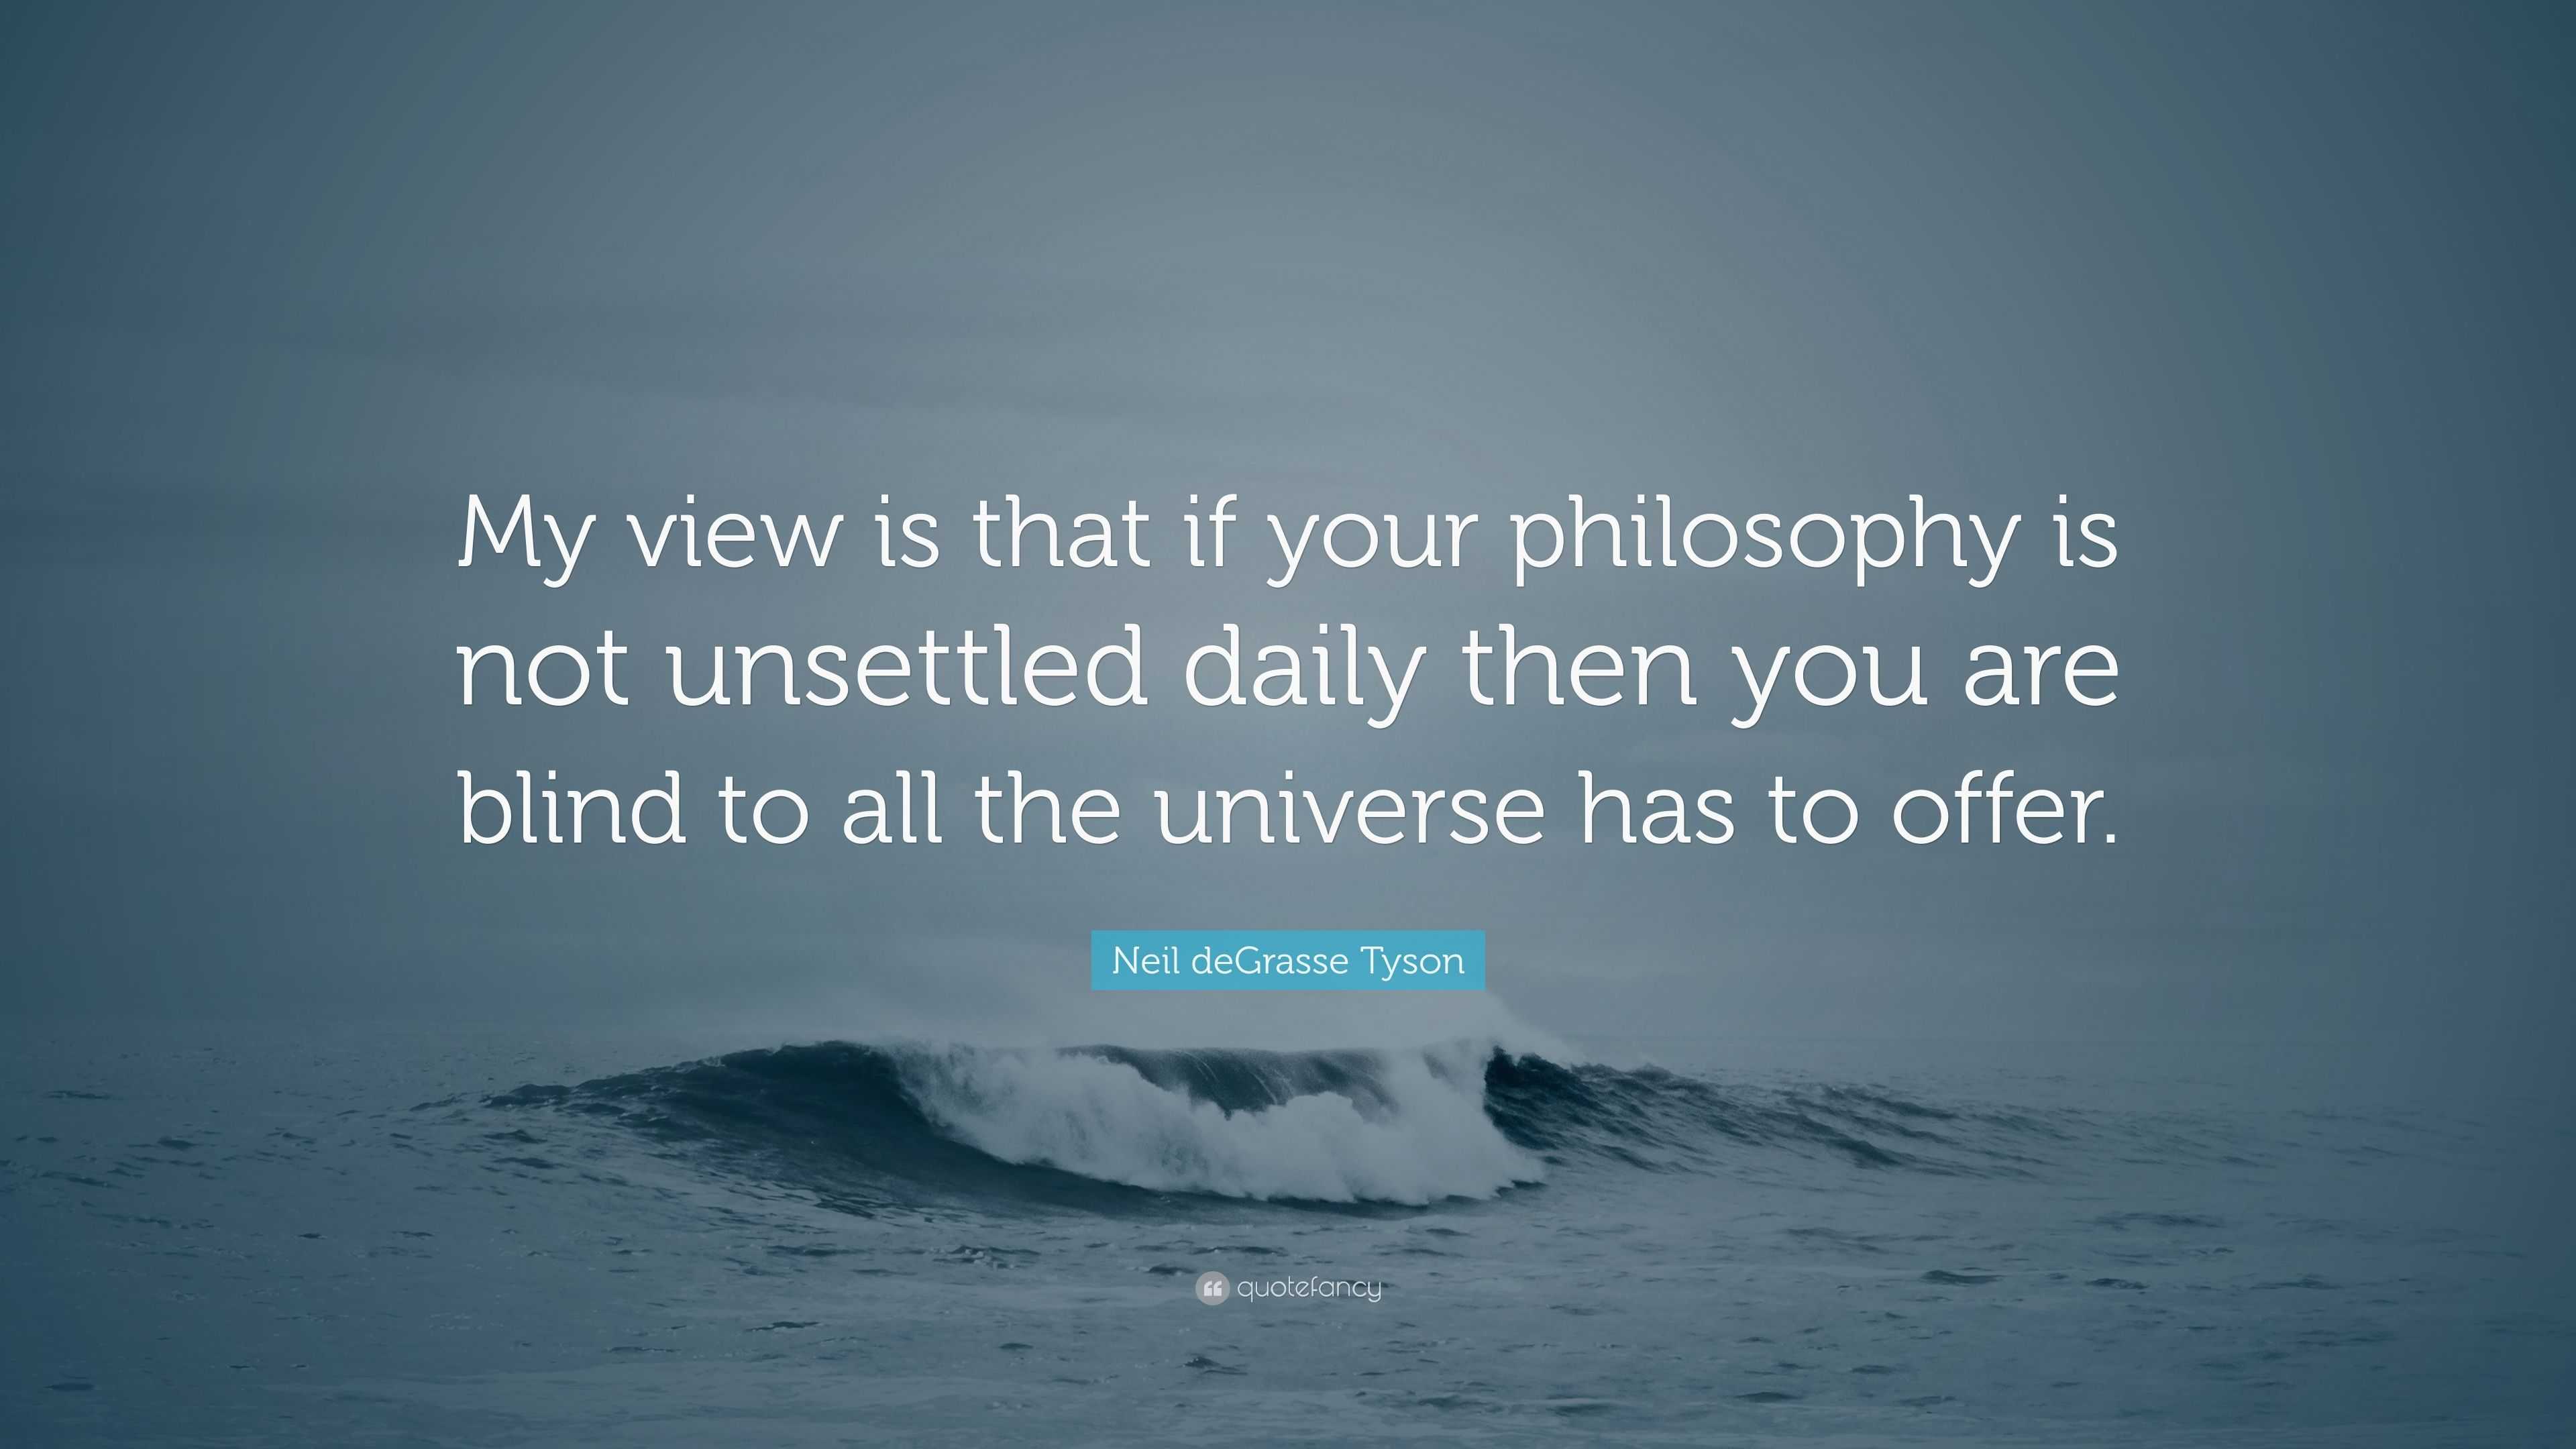 Neil deGrasse Tyson Quote: “My view is that if your philosophy is not ...